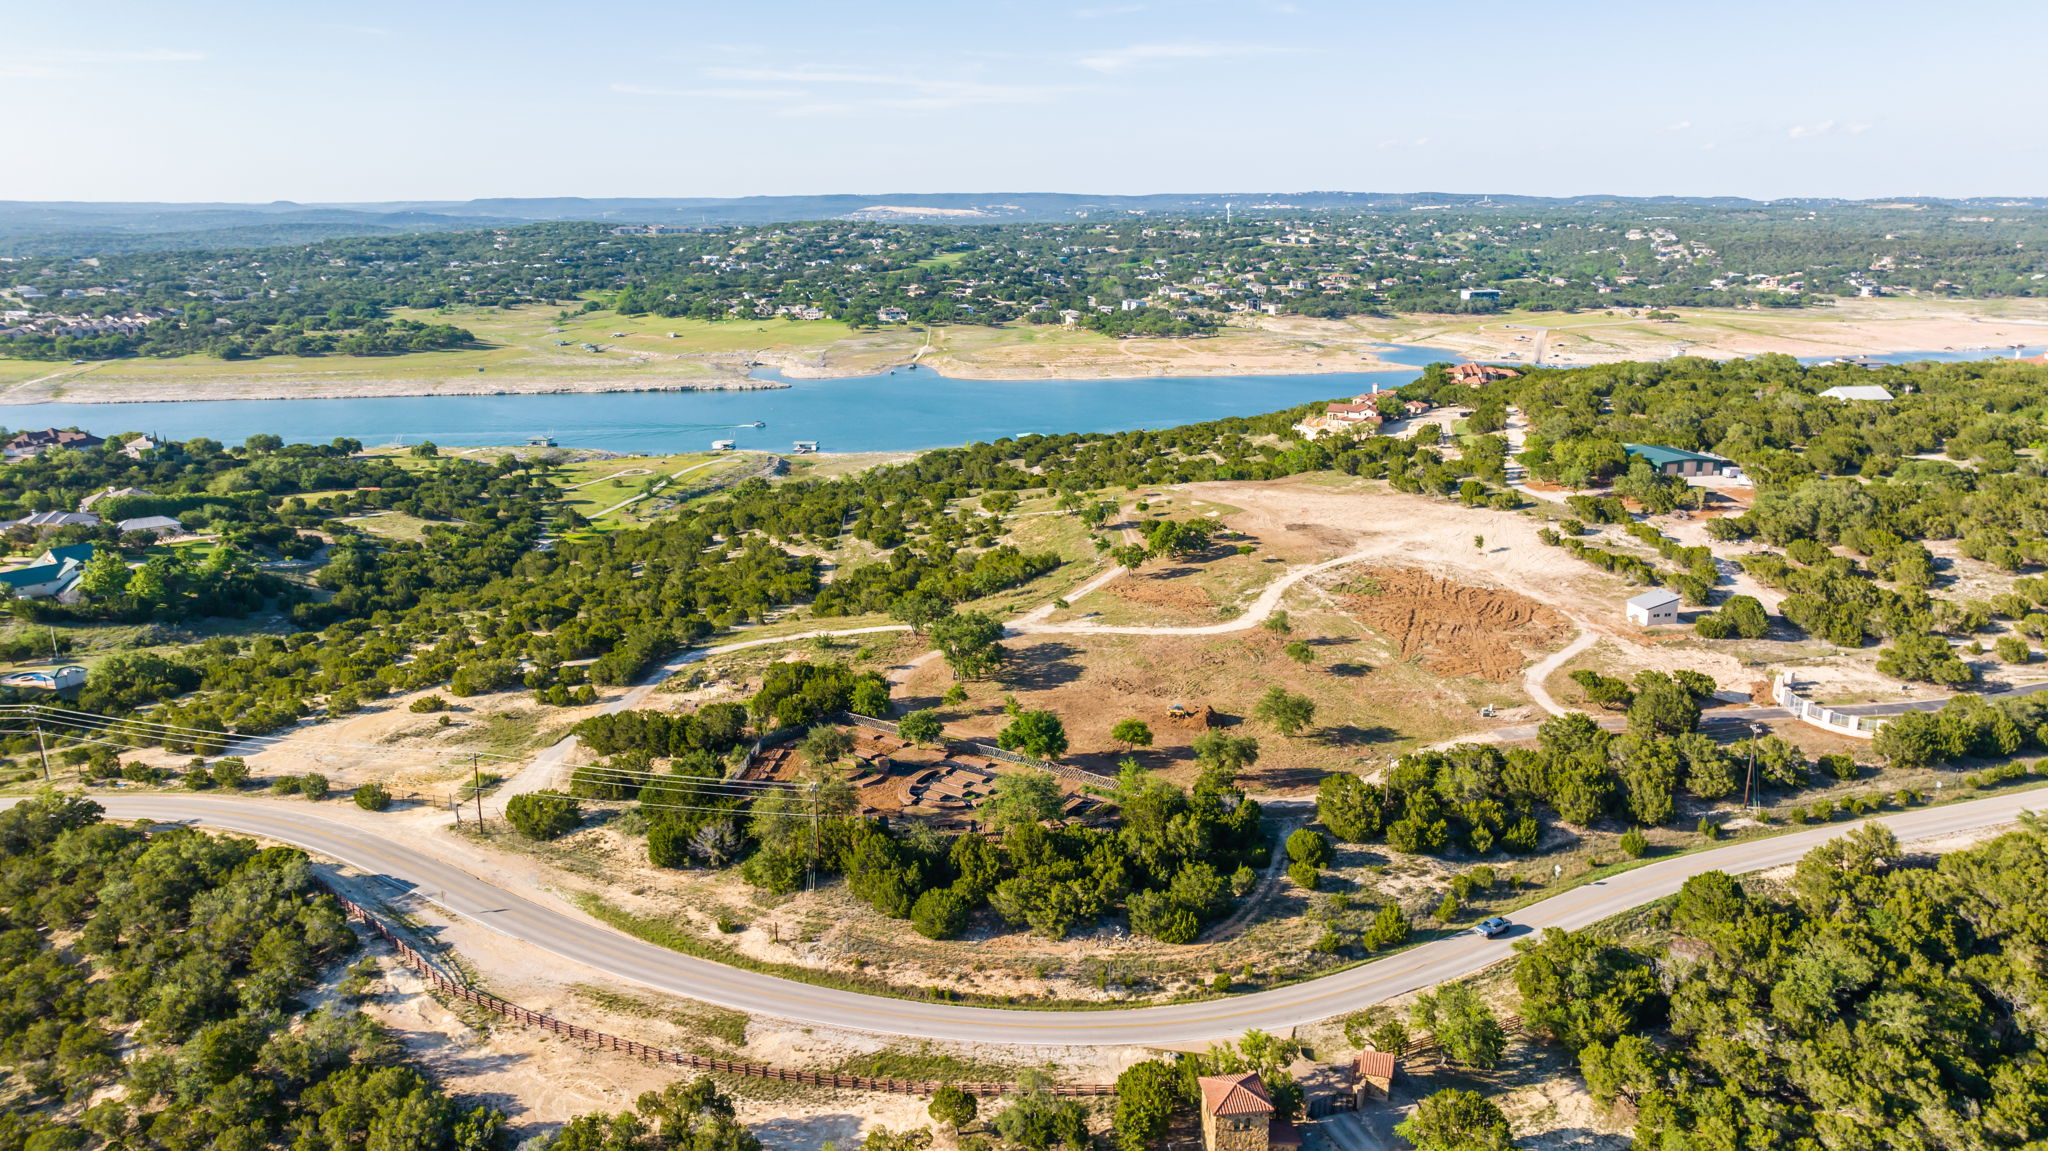 The hilltop with the partially cleared land is perfect for your new homesite. The views are fantastic!